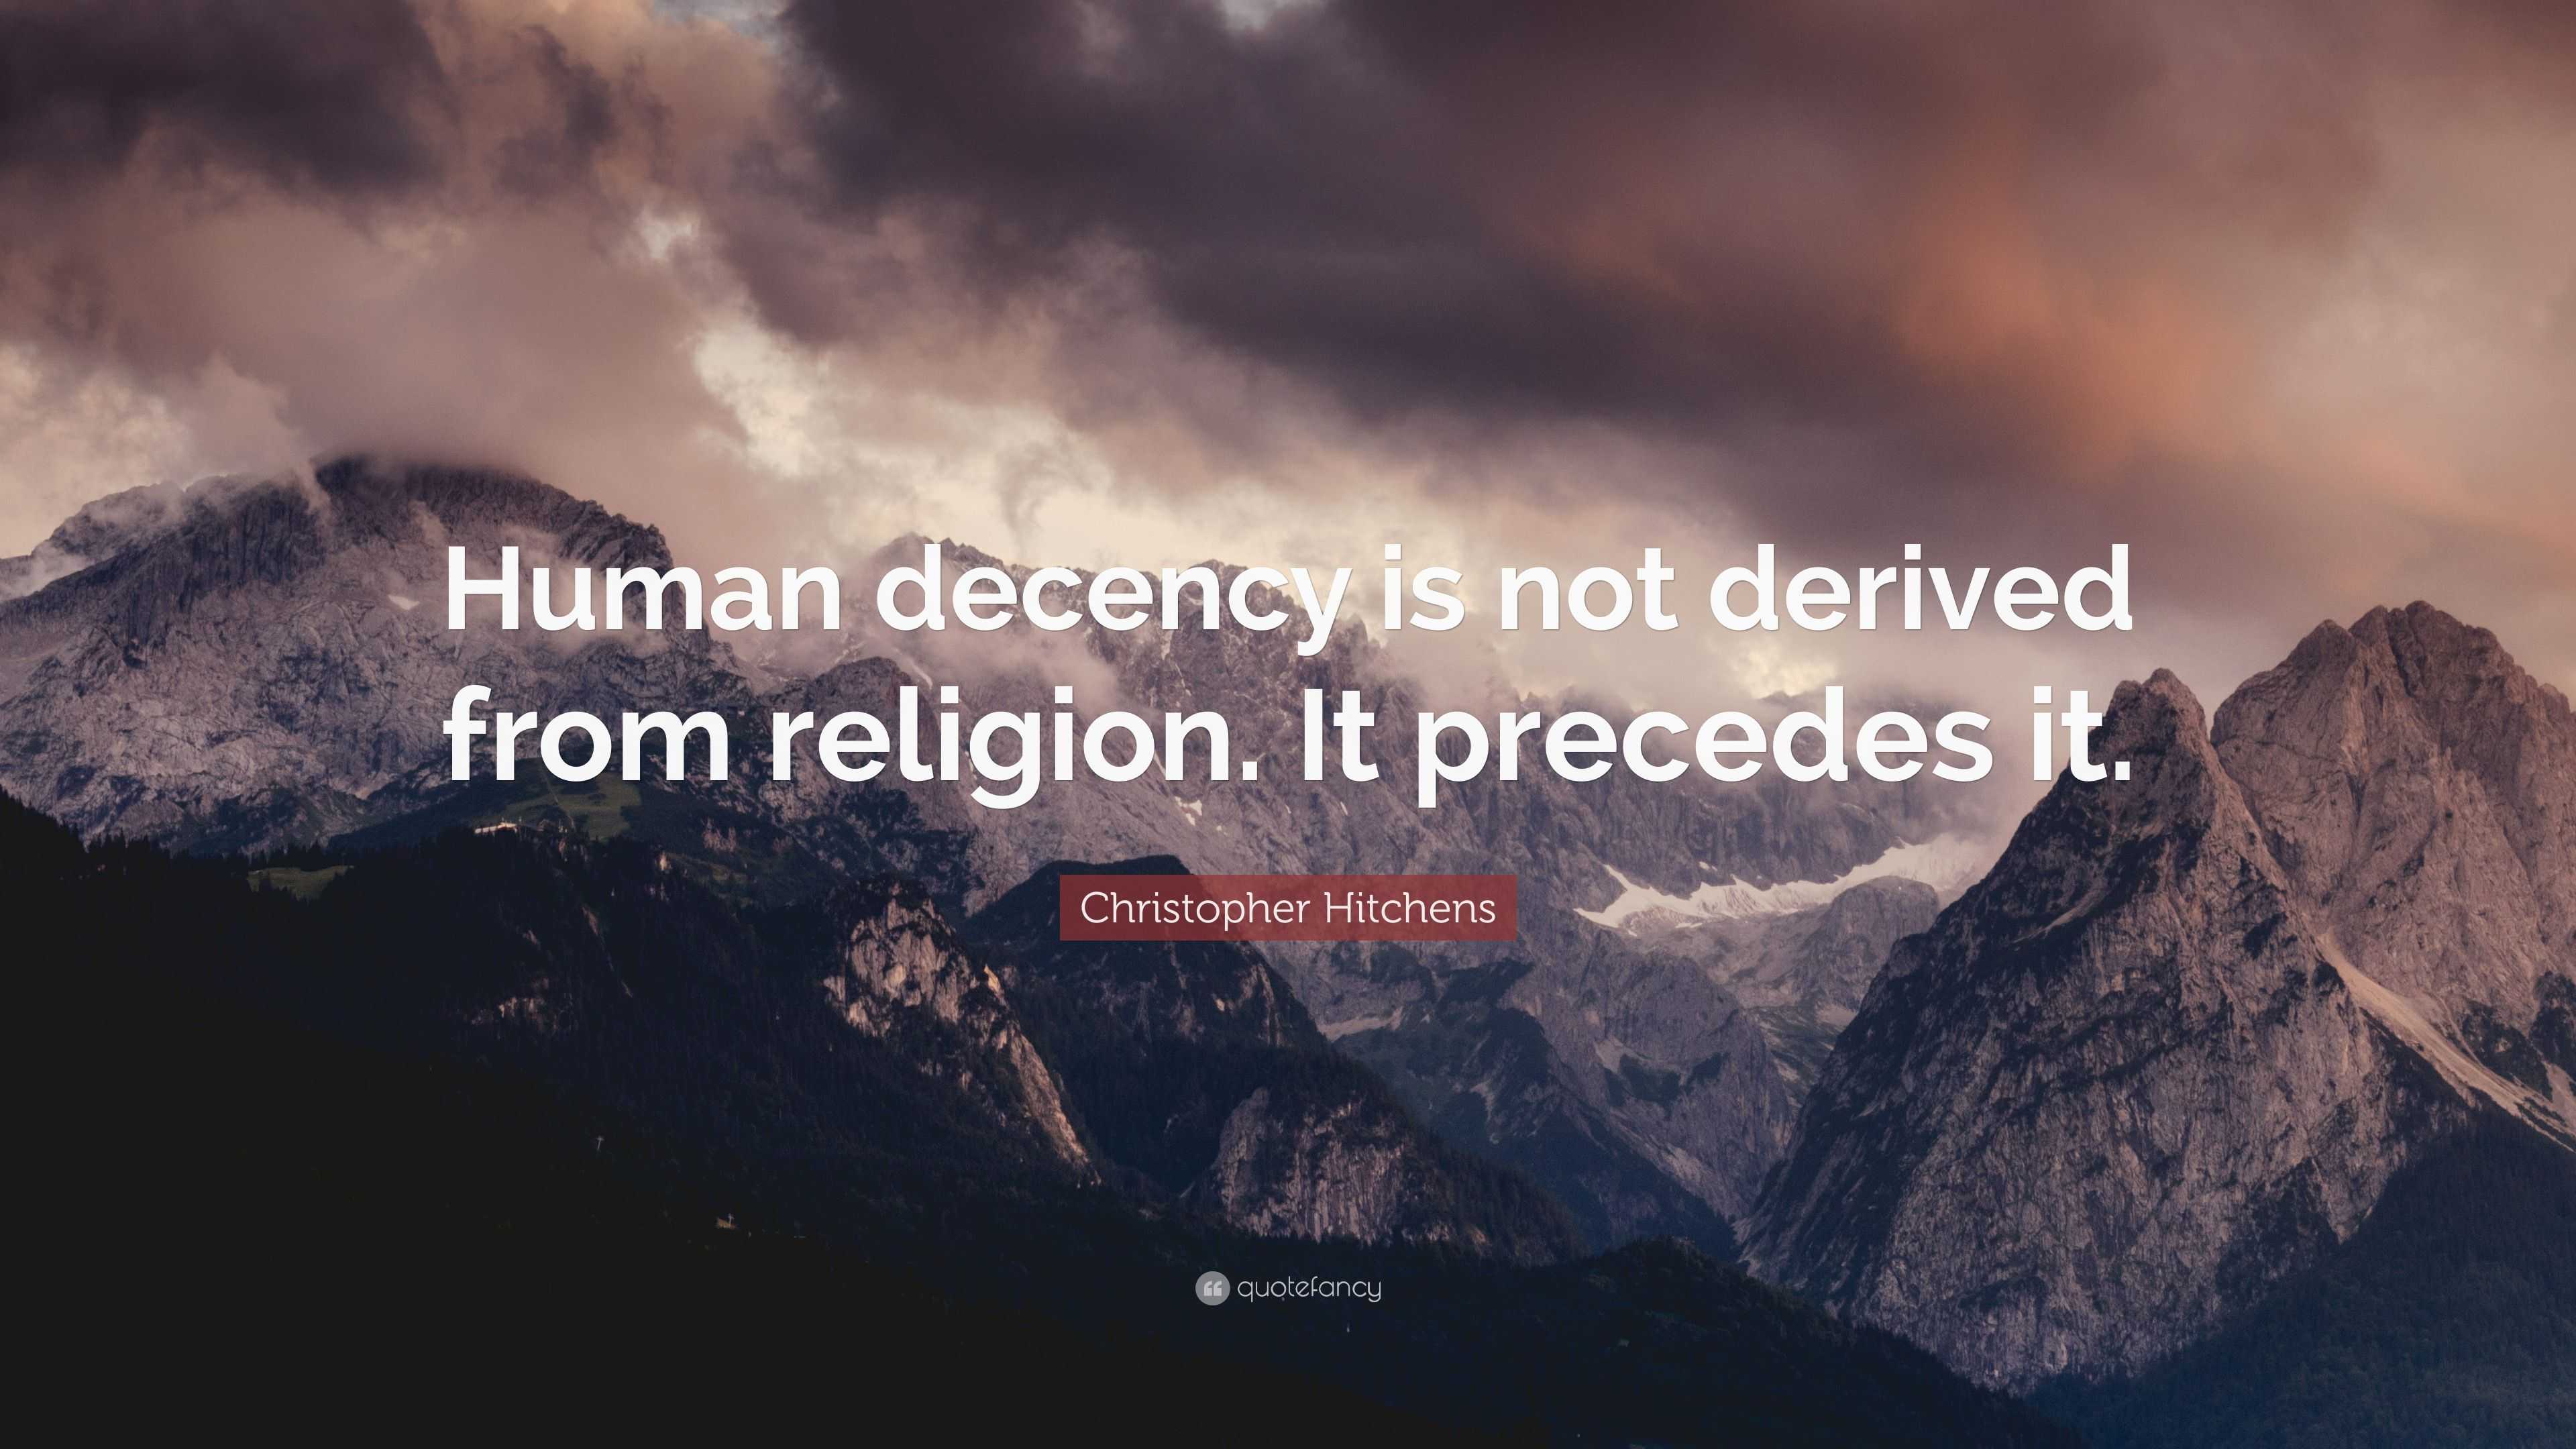 Christopher Hitchens Quote: “Human decency is not derived from religion